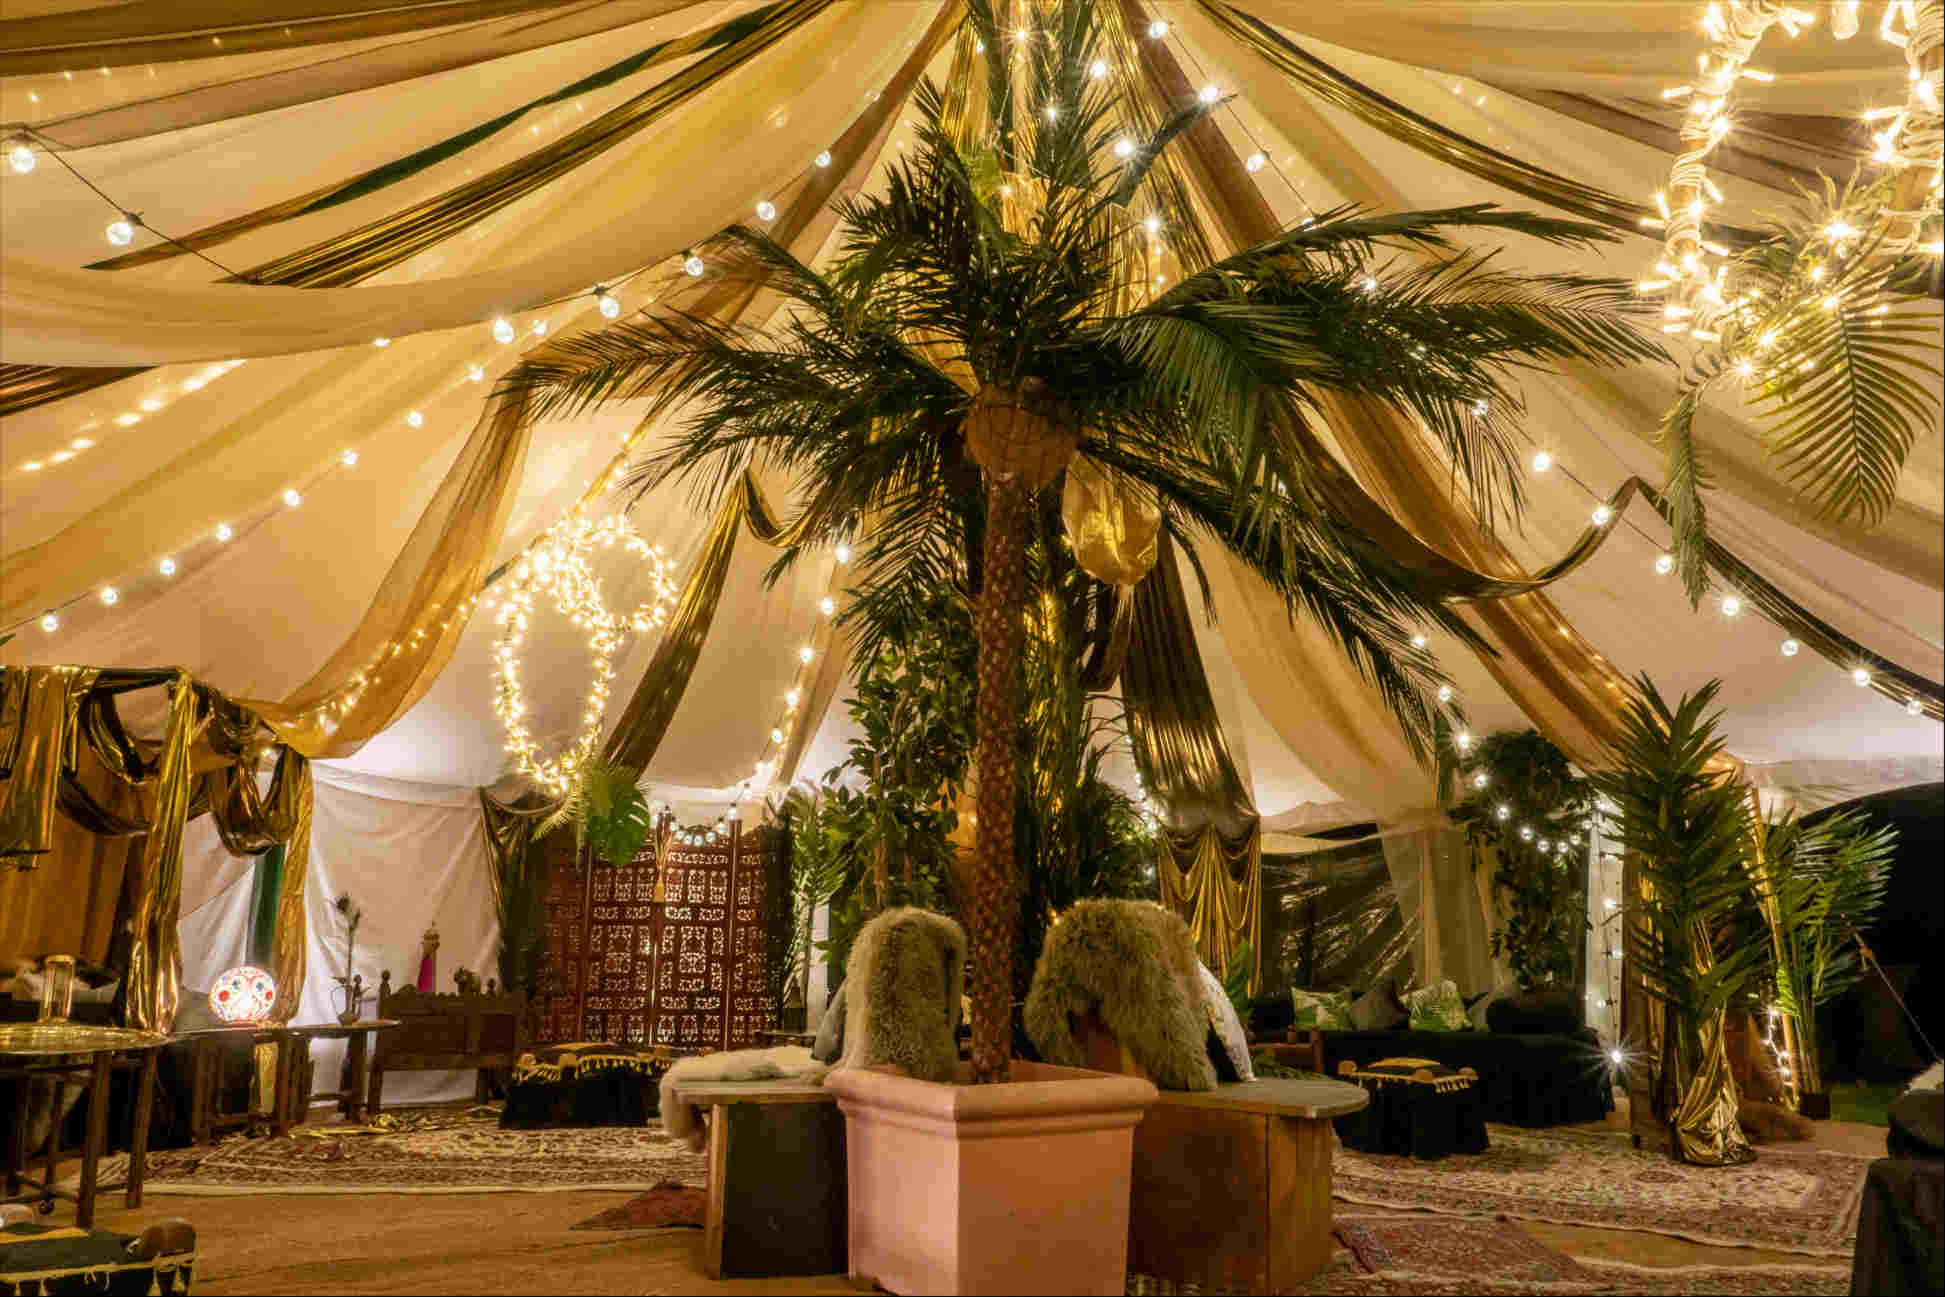 To perfectly complement our tents and interiors